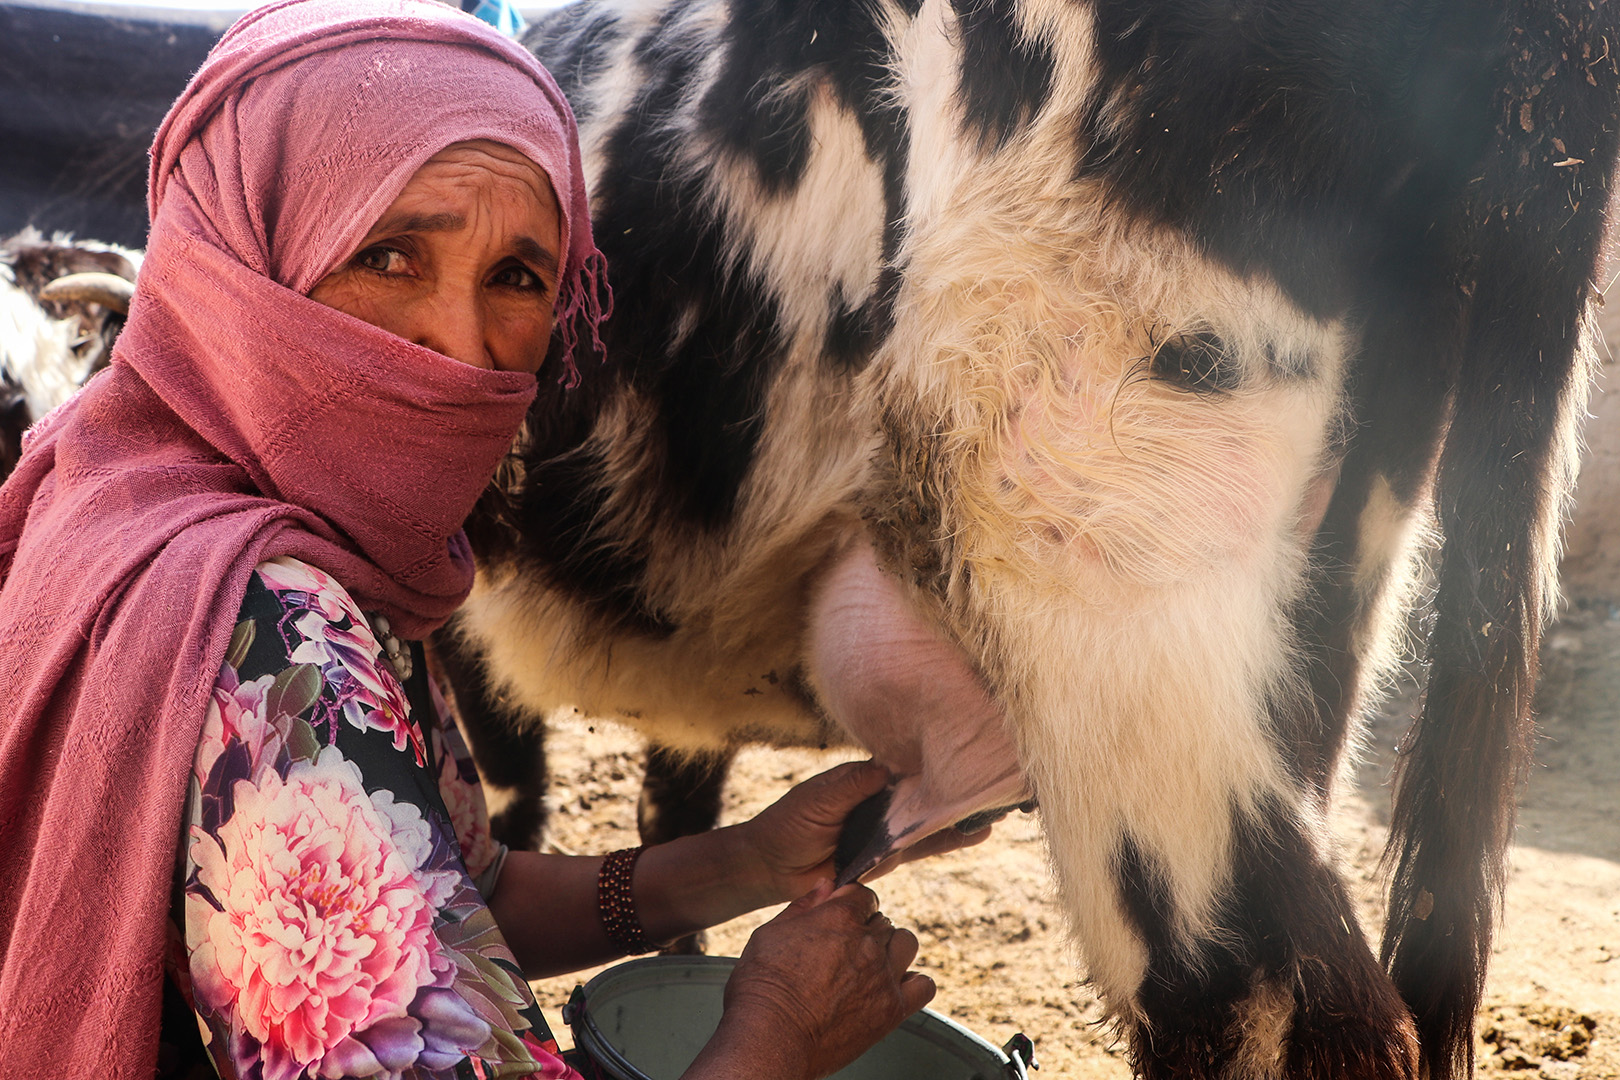 close-up of a woman milking a cow